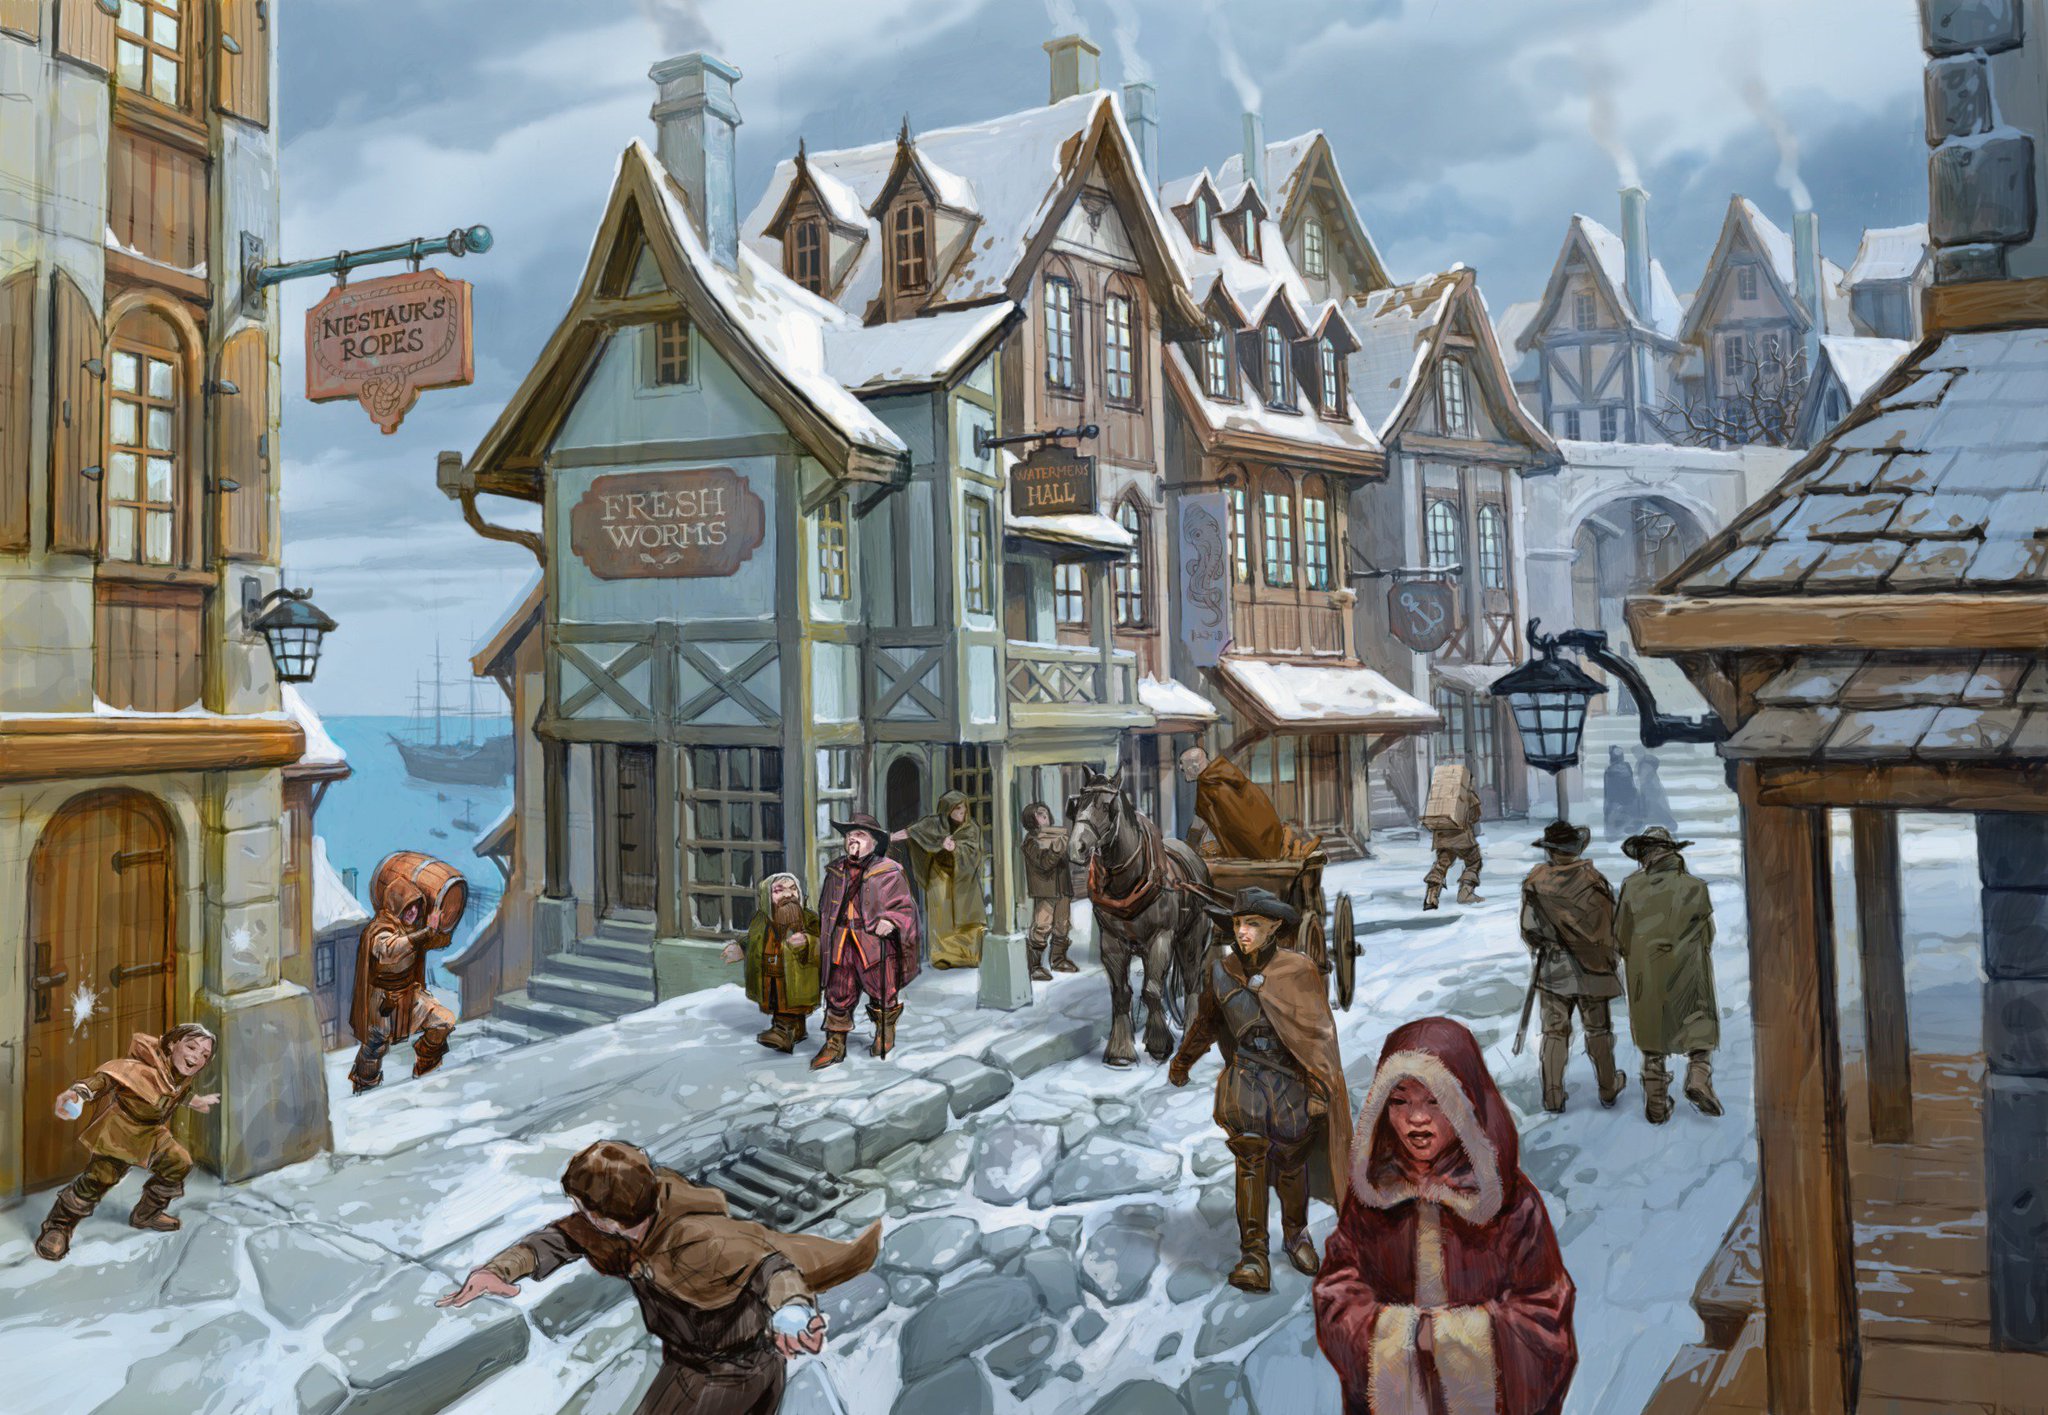 D&D Beyond the upcoming Waterdeep: Dragon Heist adventure your party can open a business in Waterdeep! What kind of business do you think your characters would run